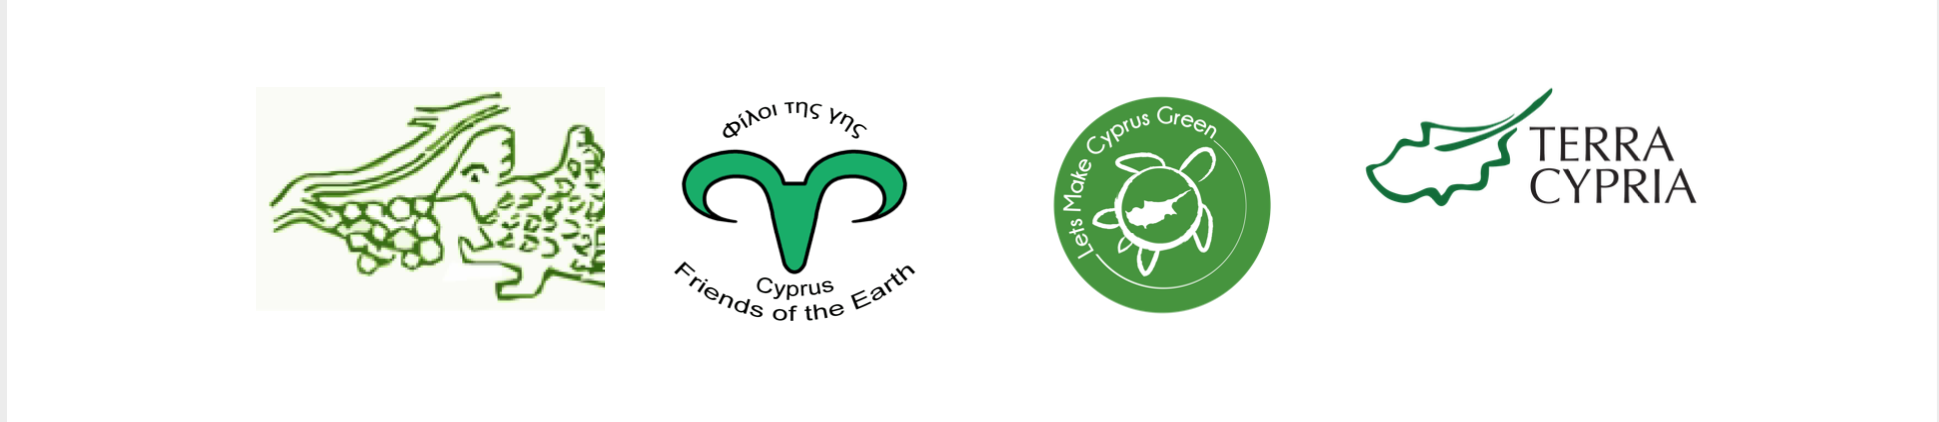 JOINT PRESS RELEASE DATED 18/12/2020 OF ΤΗΕ ENVIRONMENTAL ORGANIZATIONS ECOLOGICAL MOVEMENT CYPRUS, FRIENDS OF THE EARTH CYPRUS, LET’S MAKE CYPRUS GREEN AND TERRA CYPRIA